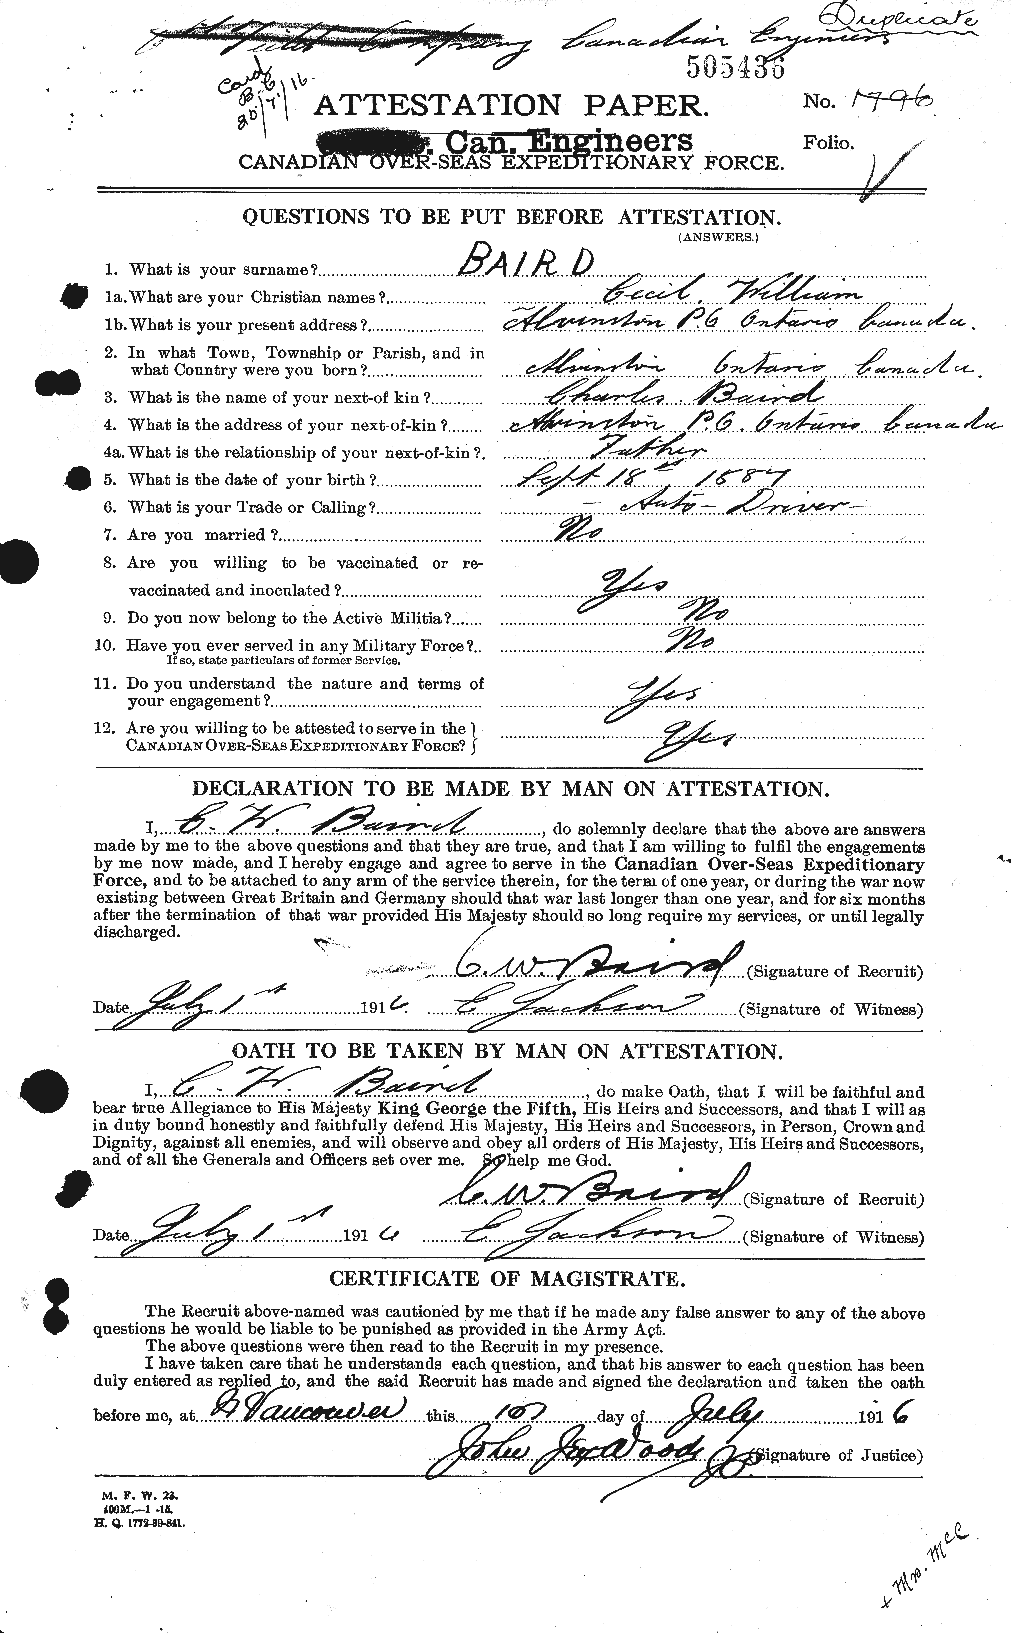 Personnel Records of the First World War - CEF 226718a